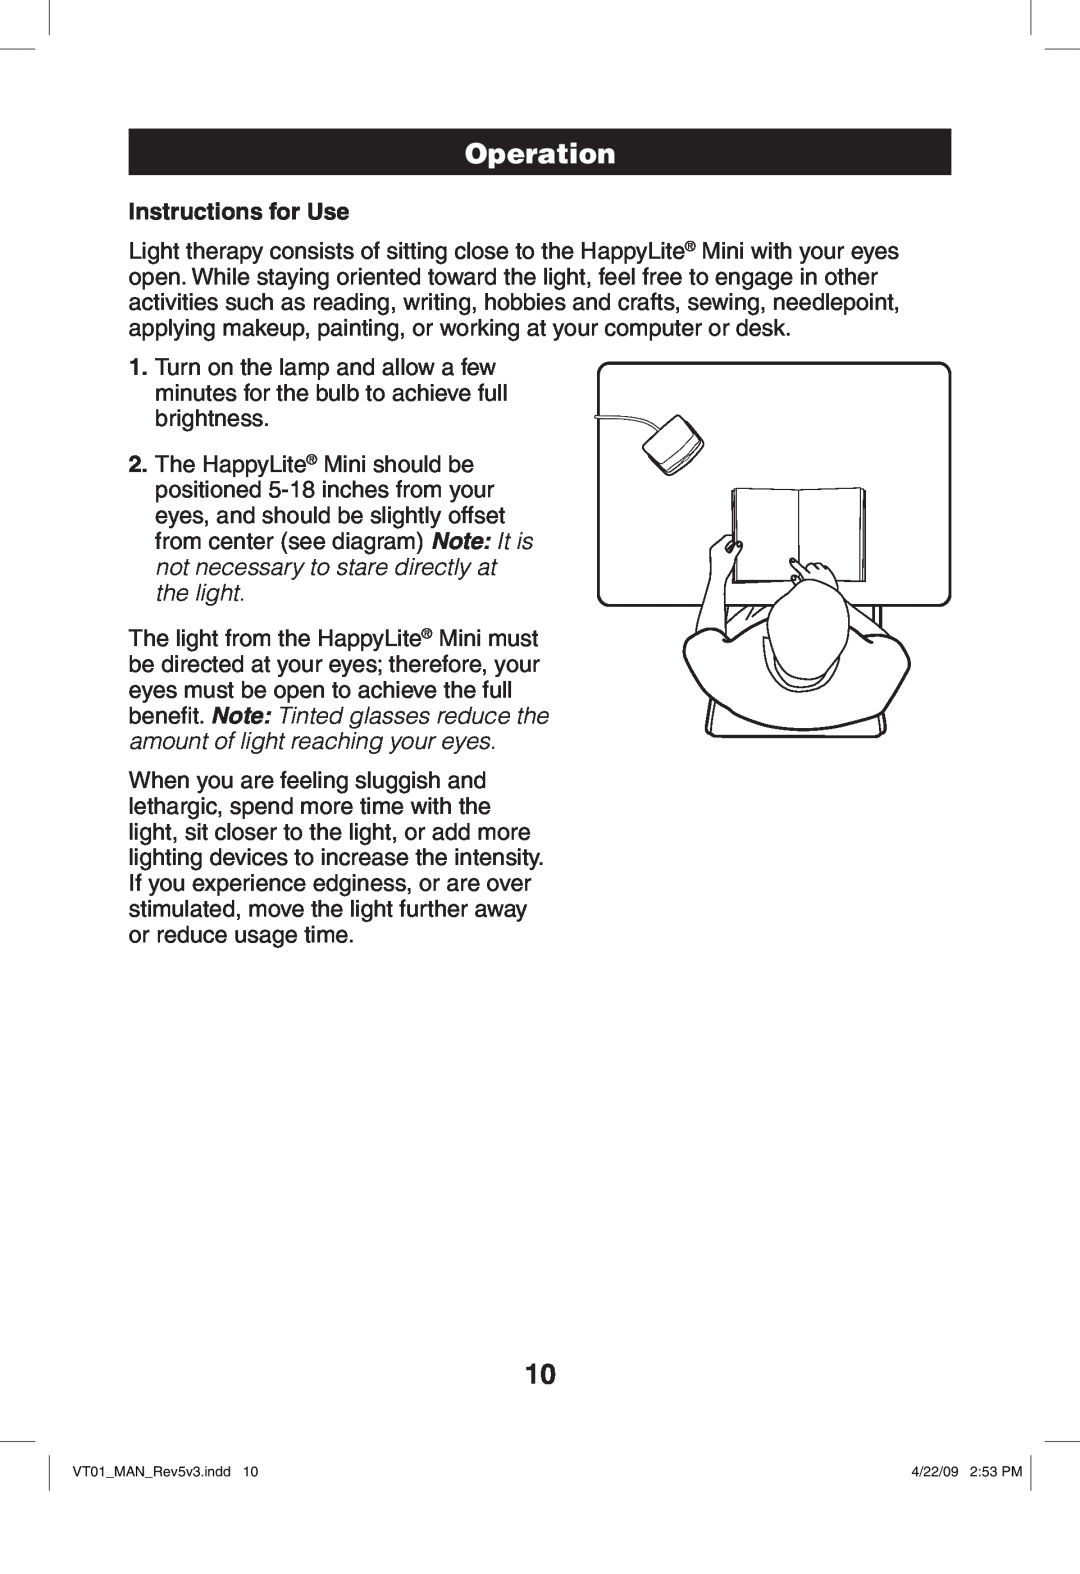 Verilux VT01 manual Operation, Instructions for Use 